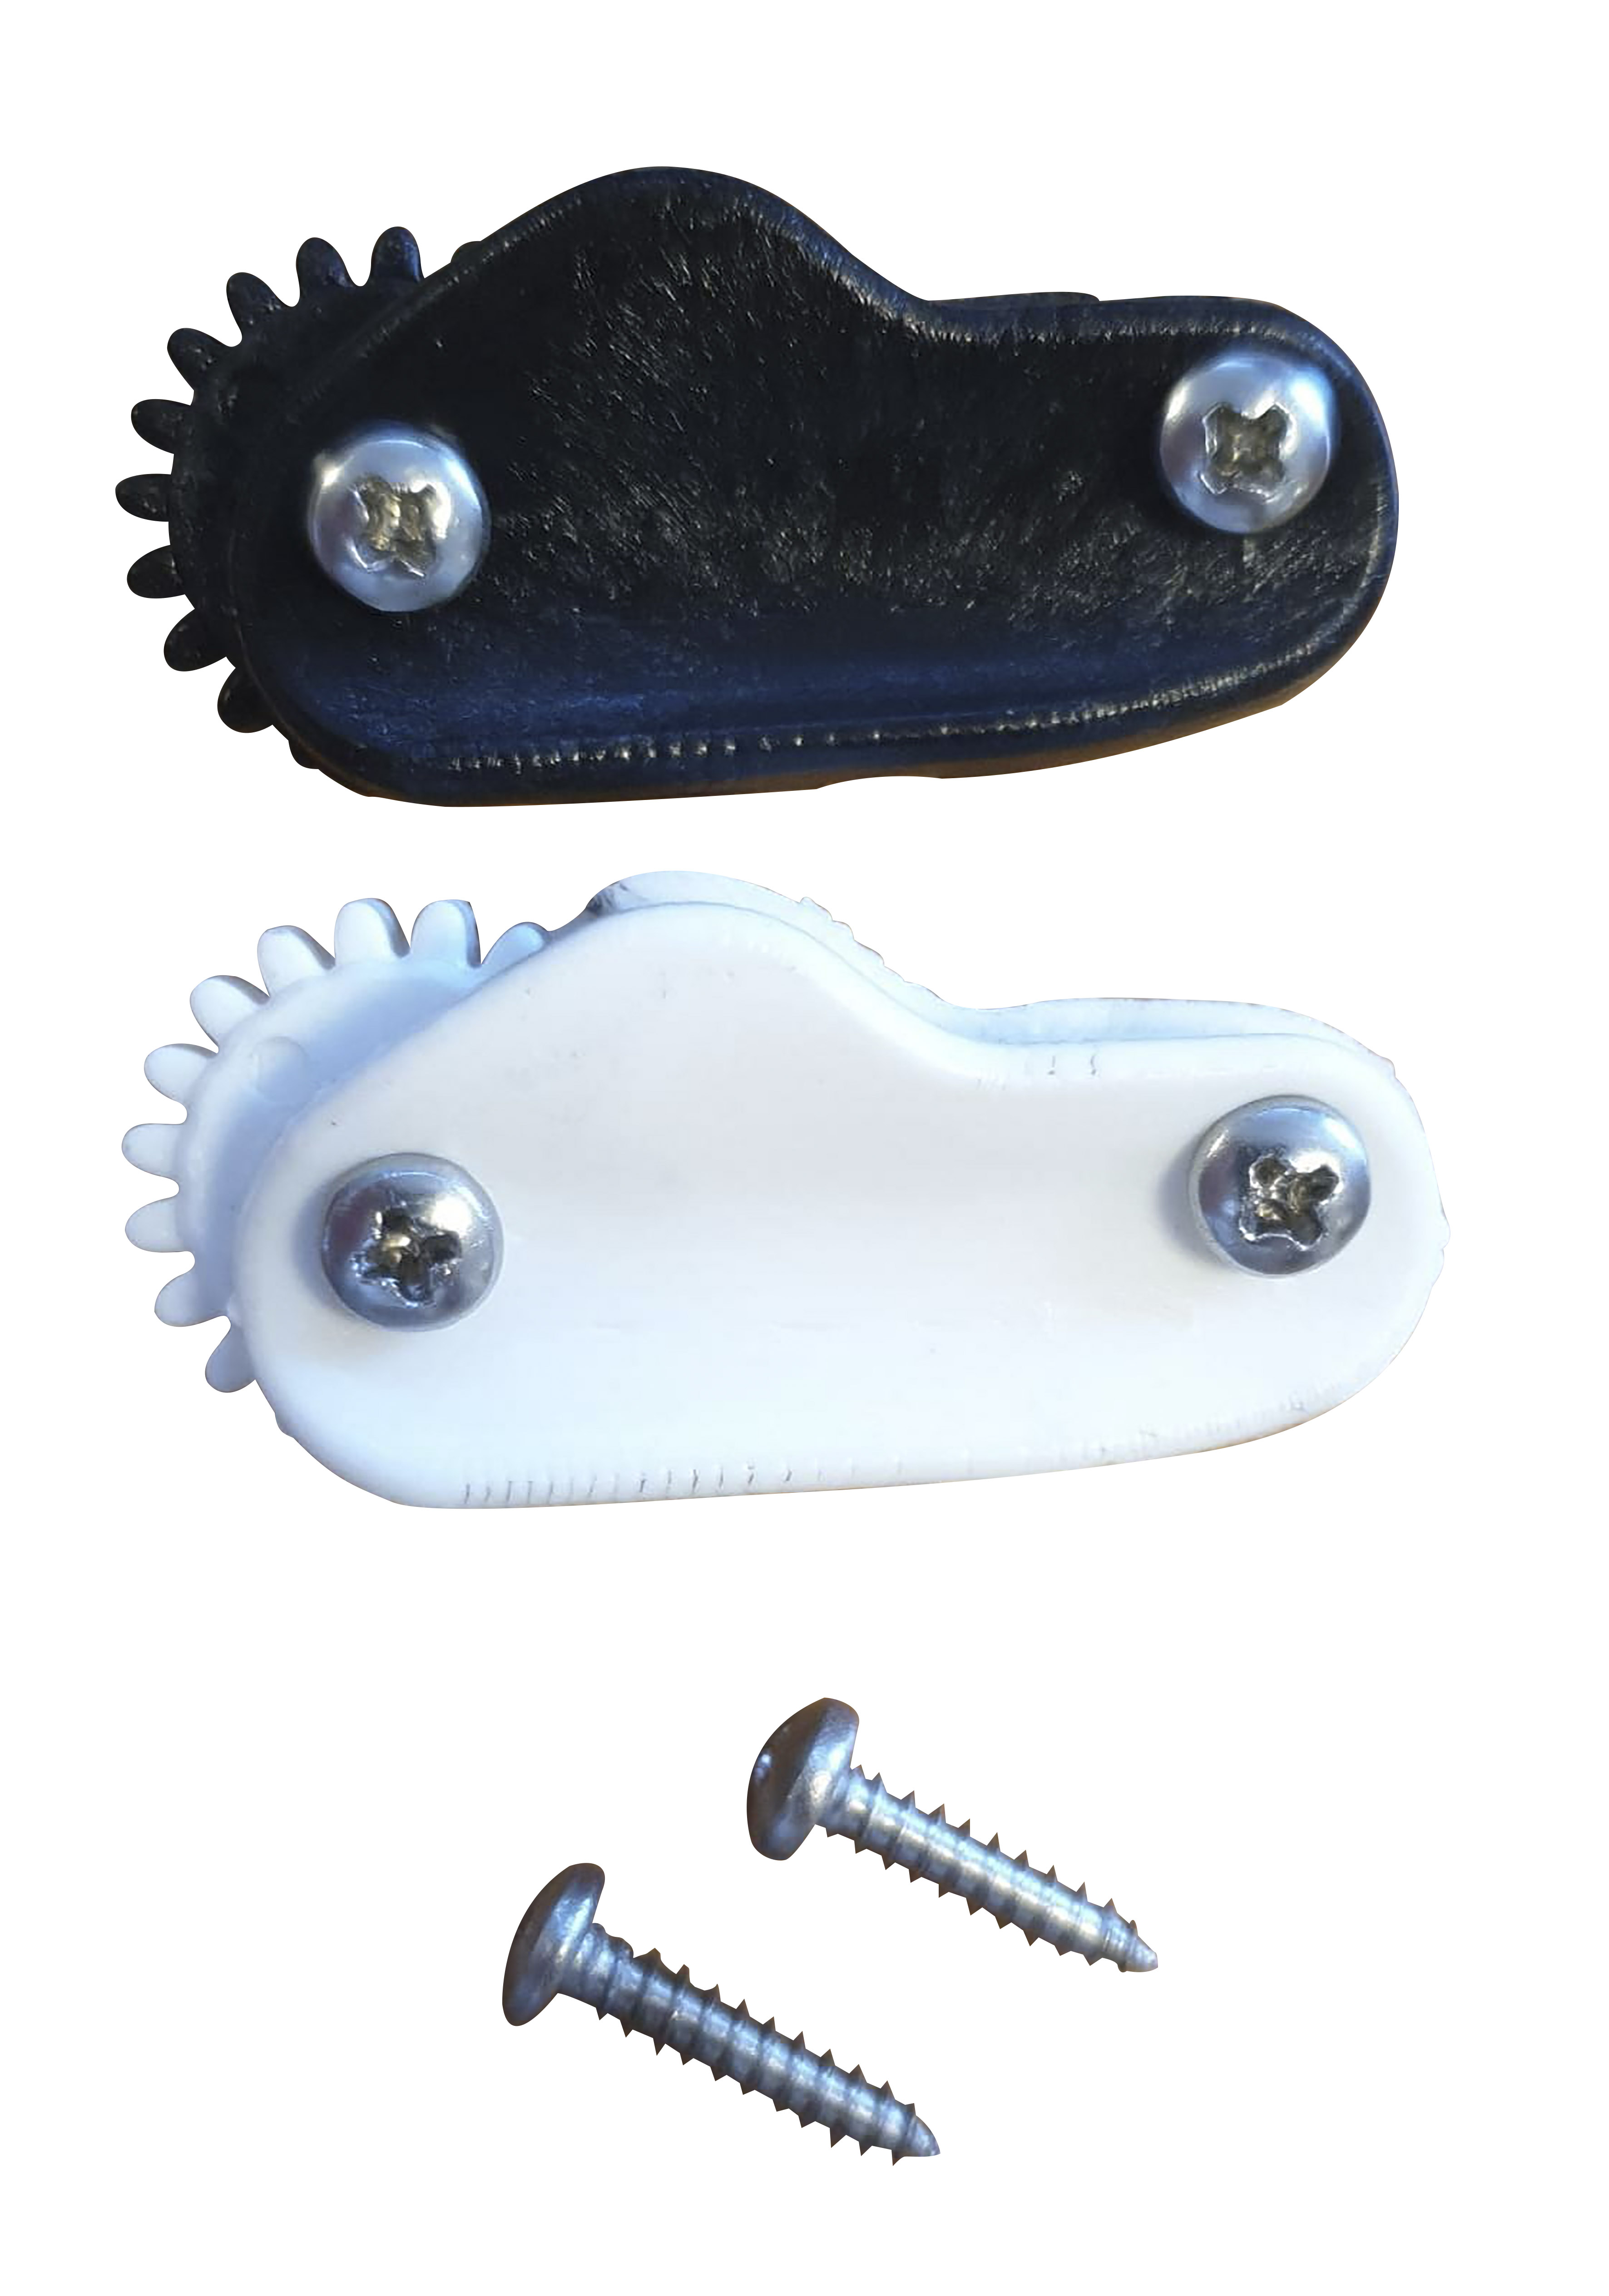 Fish Caller - Clicker for Spearguns - Attract Fish Underwater